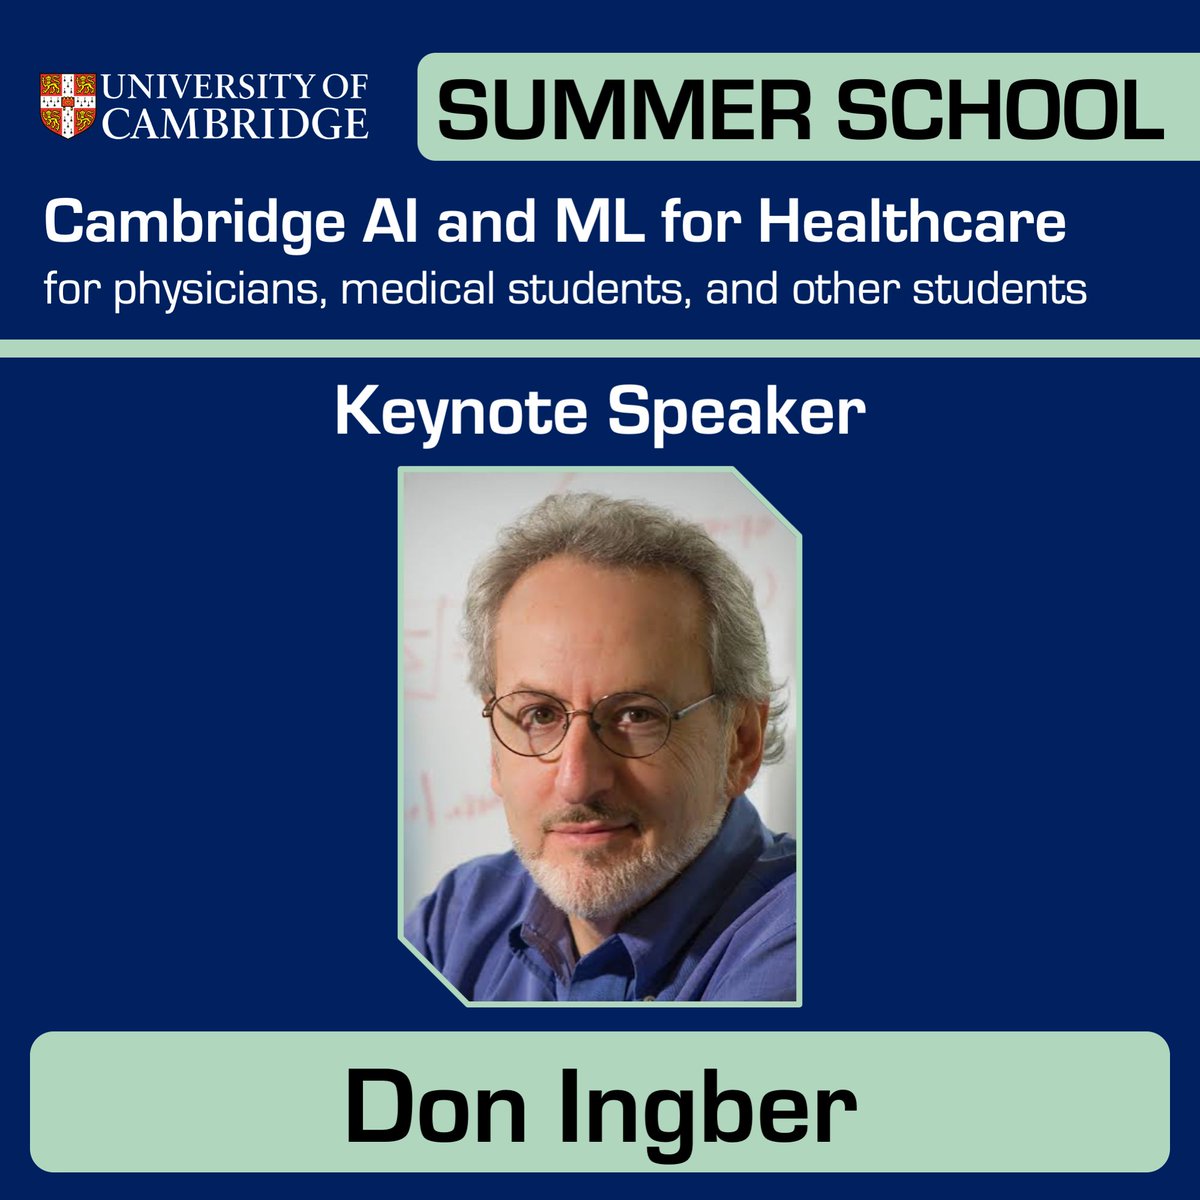 We are also very much honoured to welcome @DonIngber from the @wyssinstitute as keynote speaker for our #SummerSchool for AI in Medicine! He will talk about 'Drug Development Enabled by AI, Human Organ Chips, and Other Novel Experimental Models'. Join us: vanderschaar-lab.com/cambridge-ai-i…